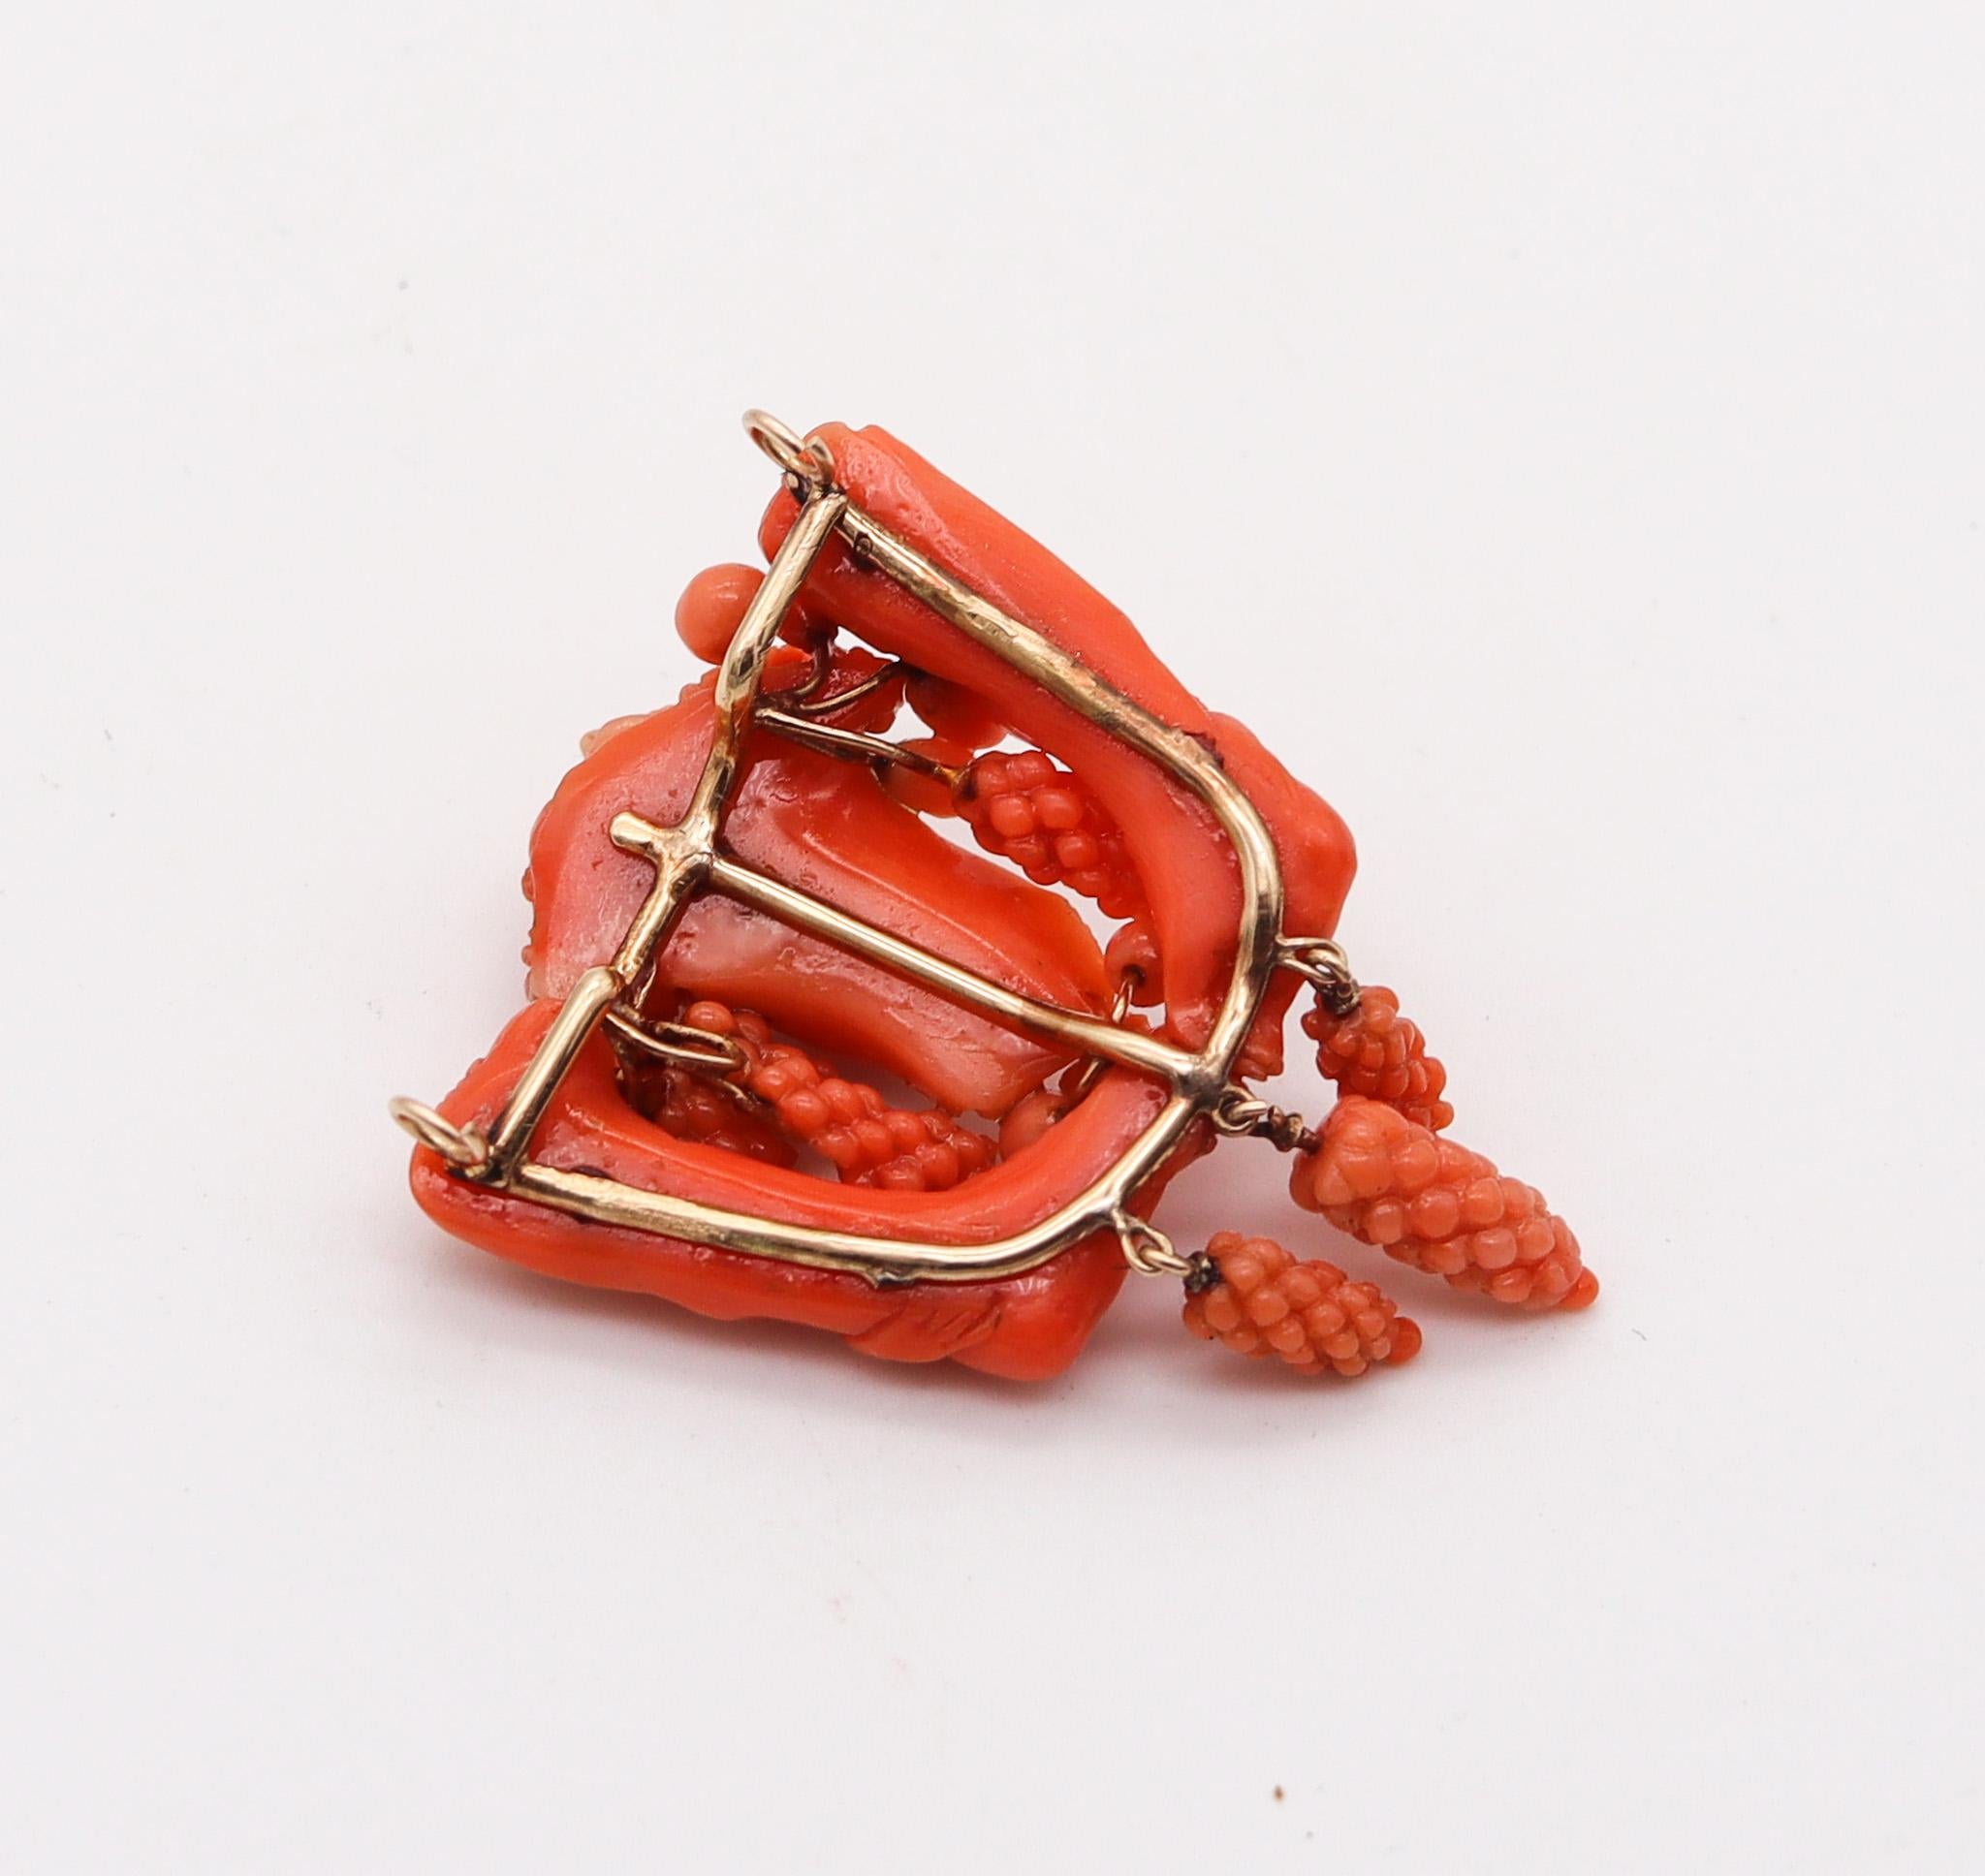 Italian 1850 Renaissance Revival Pendant Carved In Coral  Mount In 14Kt Gold In Excellent Condition For Sale In Miami, FL